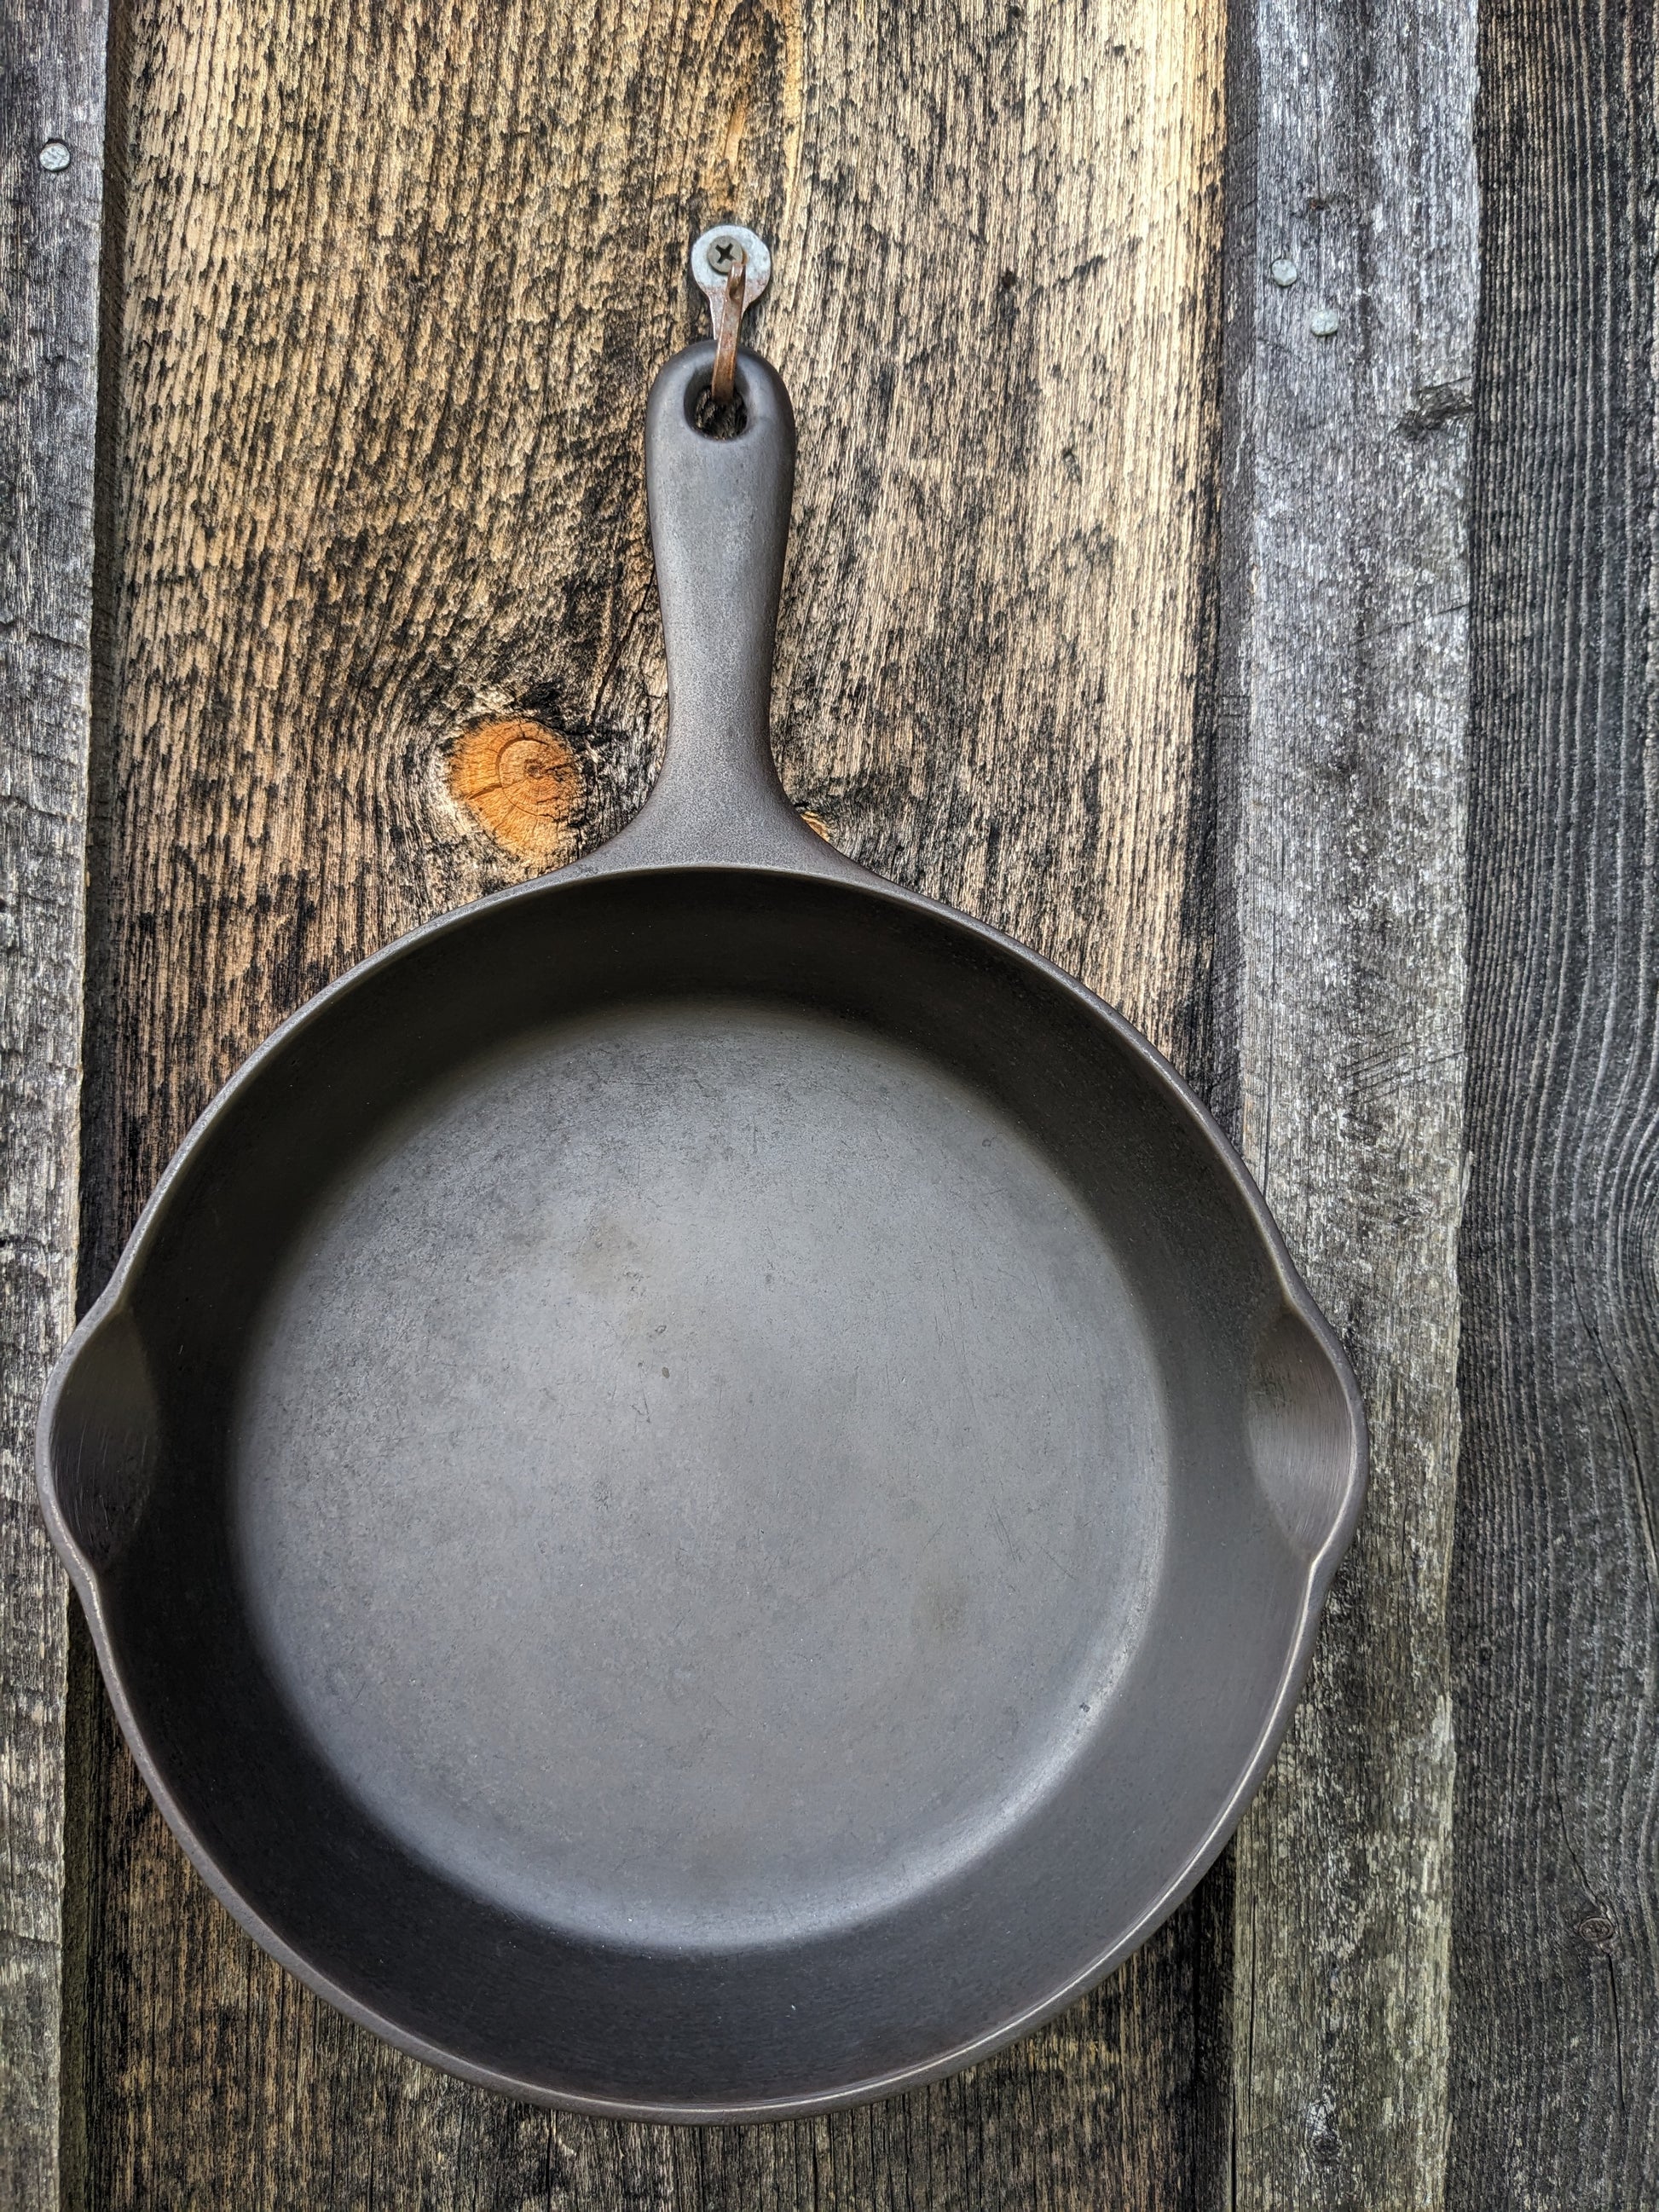 Help me with this Griswold cast iron skillet! : r/BuyItForLife